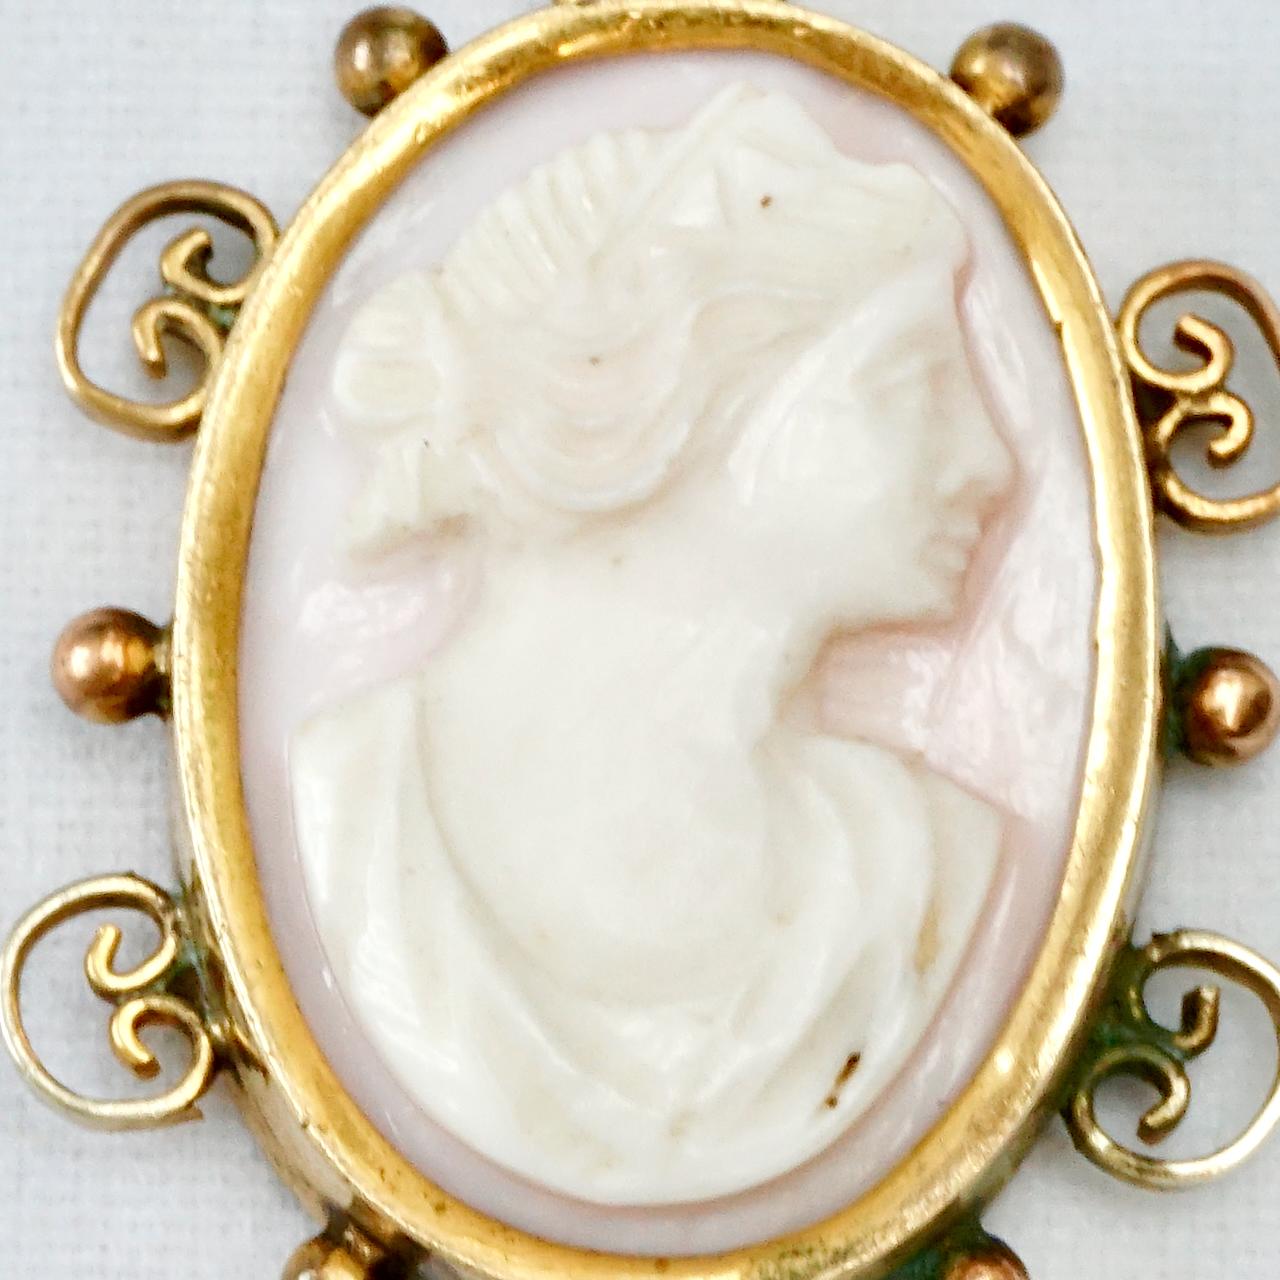 Beautiful antique carved angel skin coral cameo pendant of a lady, in a decorative gold plated setting. Measuring 3.3 cm / 1.3 inches by 2.4 cm / .9 inch. There is wear to the gold plating.

This is a lovely angel skin cameo pendant from the